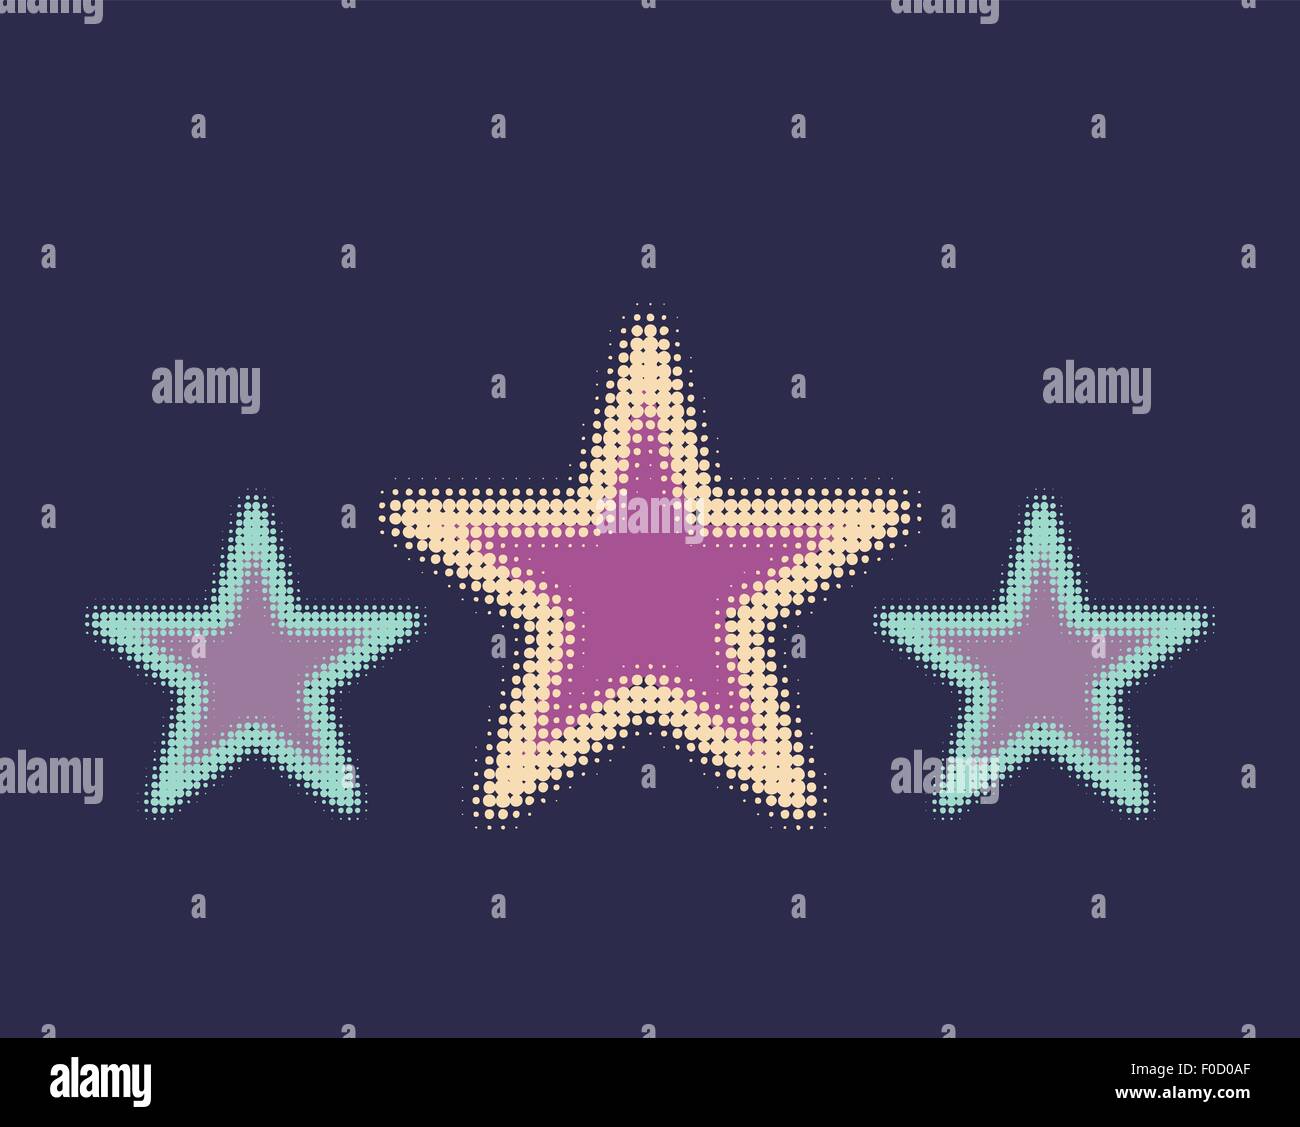 three stars with halftone effect Stock Vector